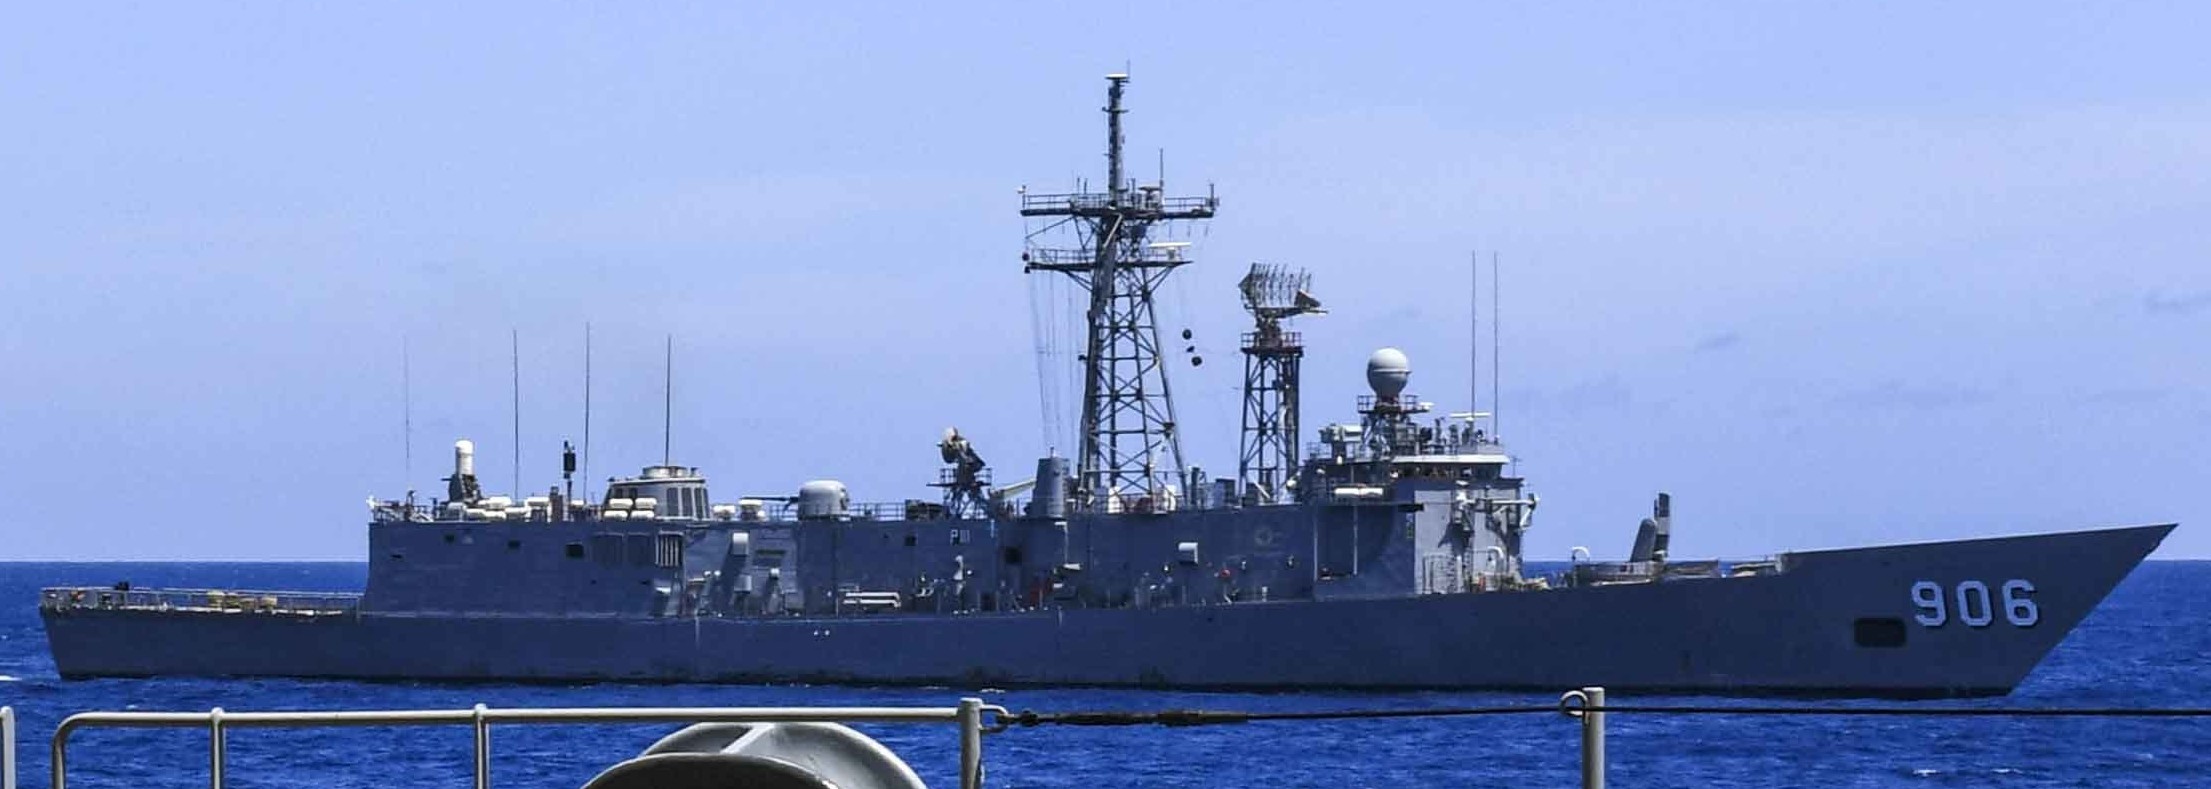 f-906 ens toushka perry class frigate egyptian naval force navy 02